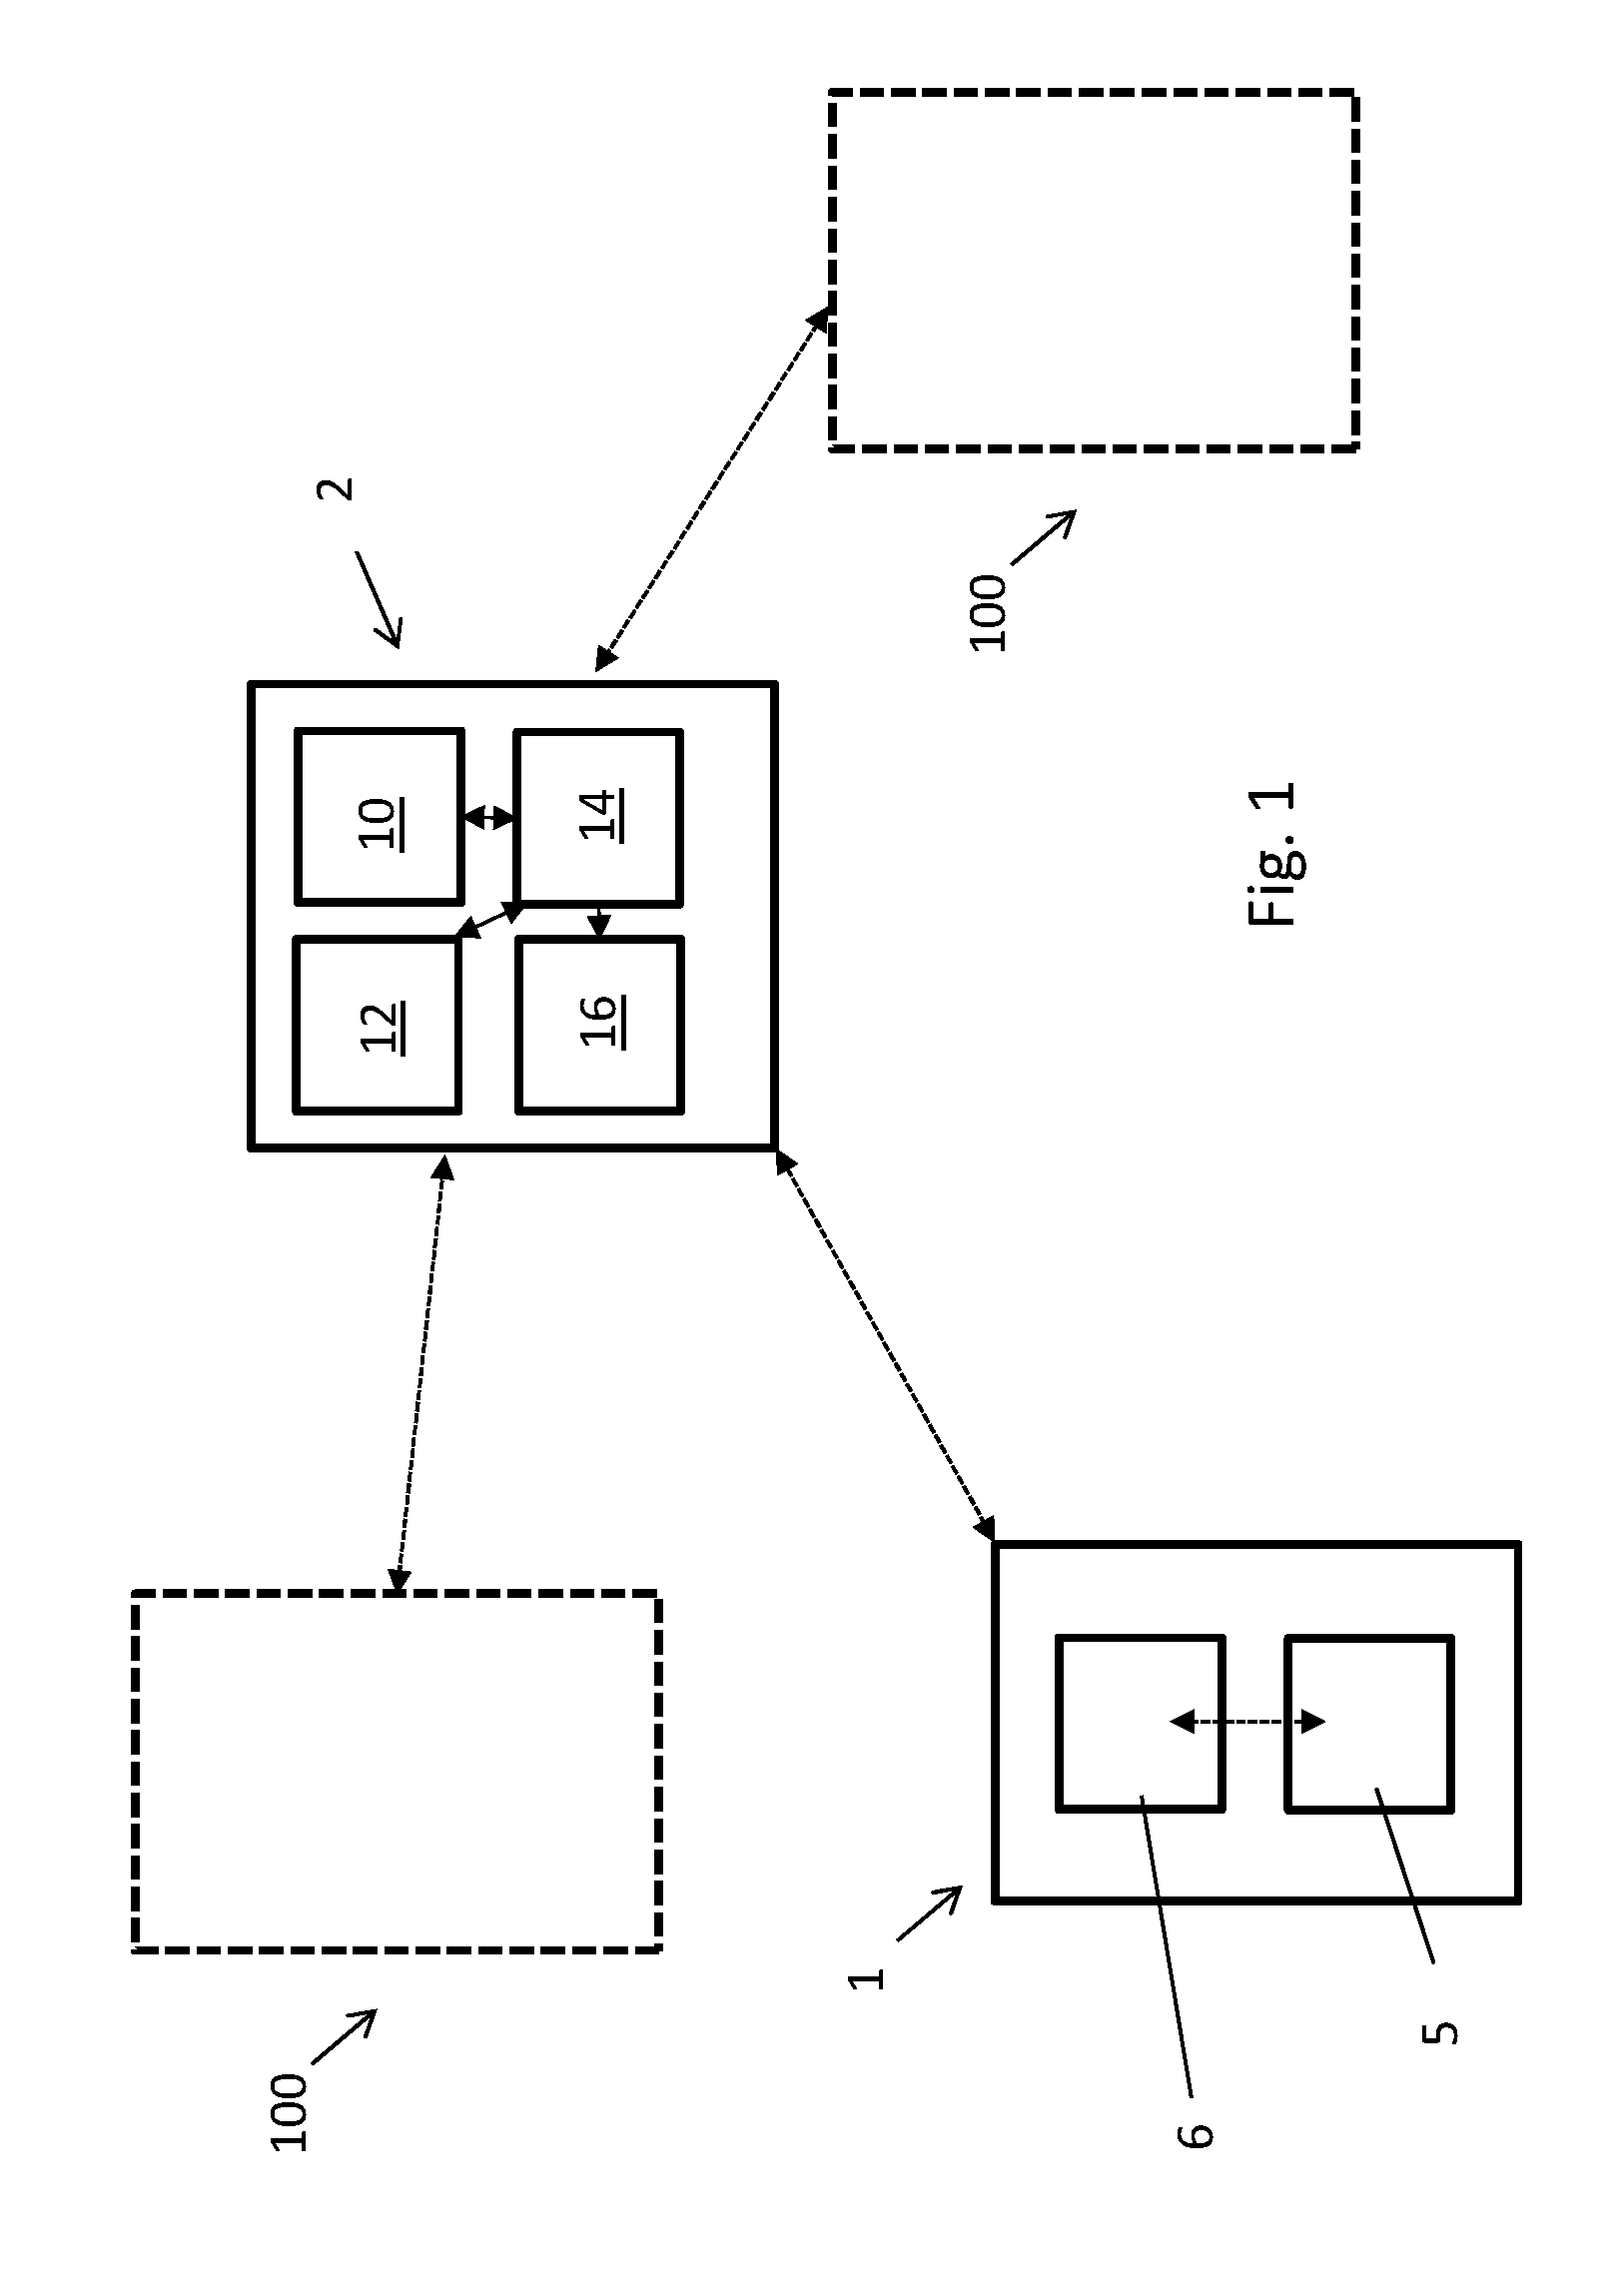 Method of providing positioning data to mobile device